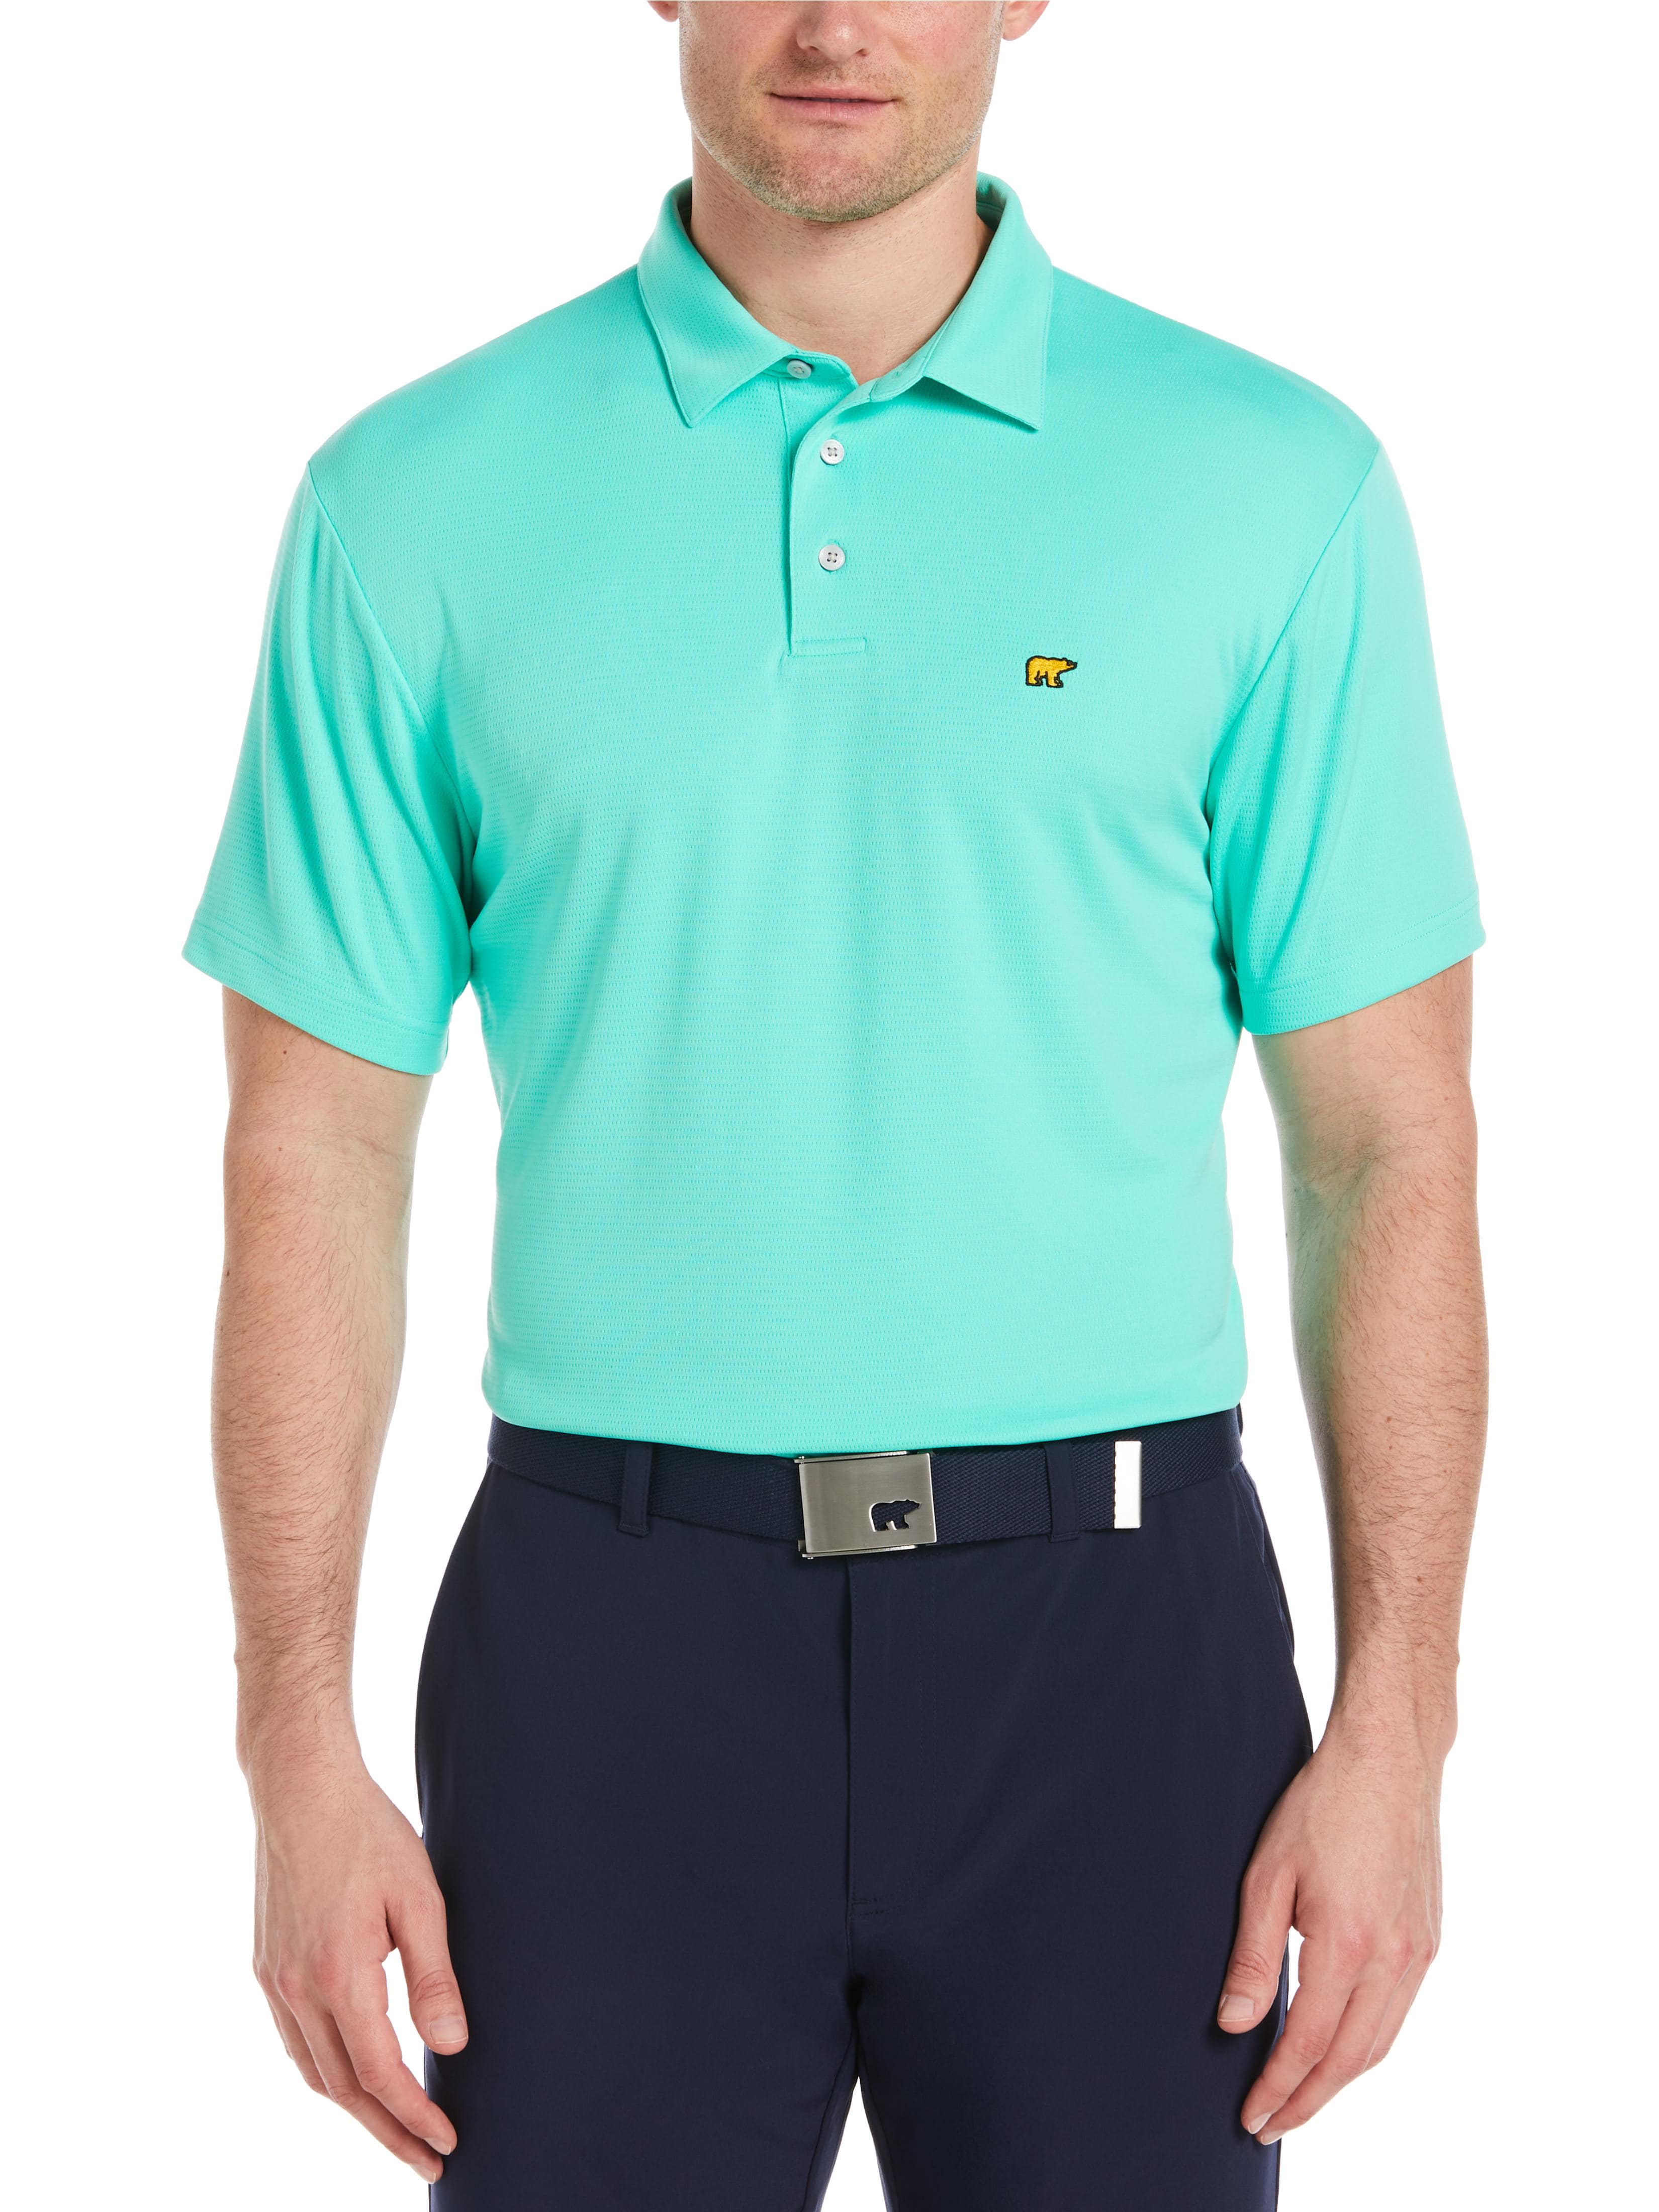 Jack Nicklaus Mens Solid Textured Golf Polo Shirt, Size XL, Biscay Green, 100% Polyester | Golf Apparel Shop